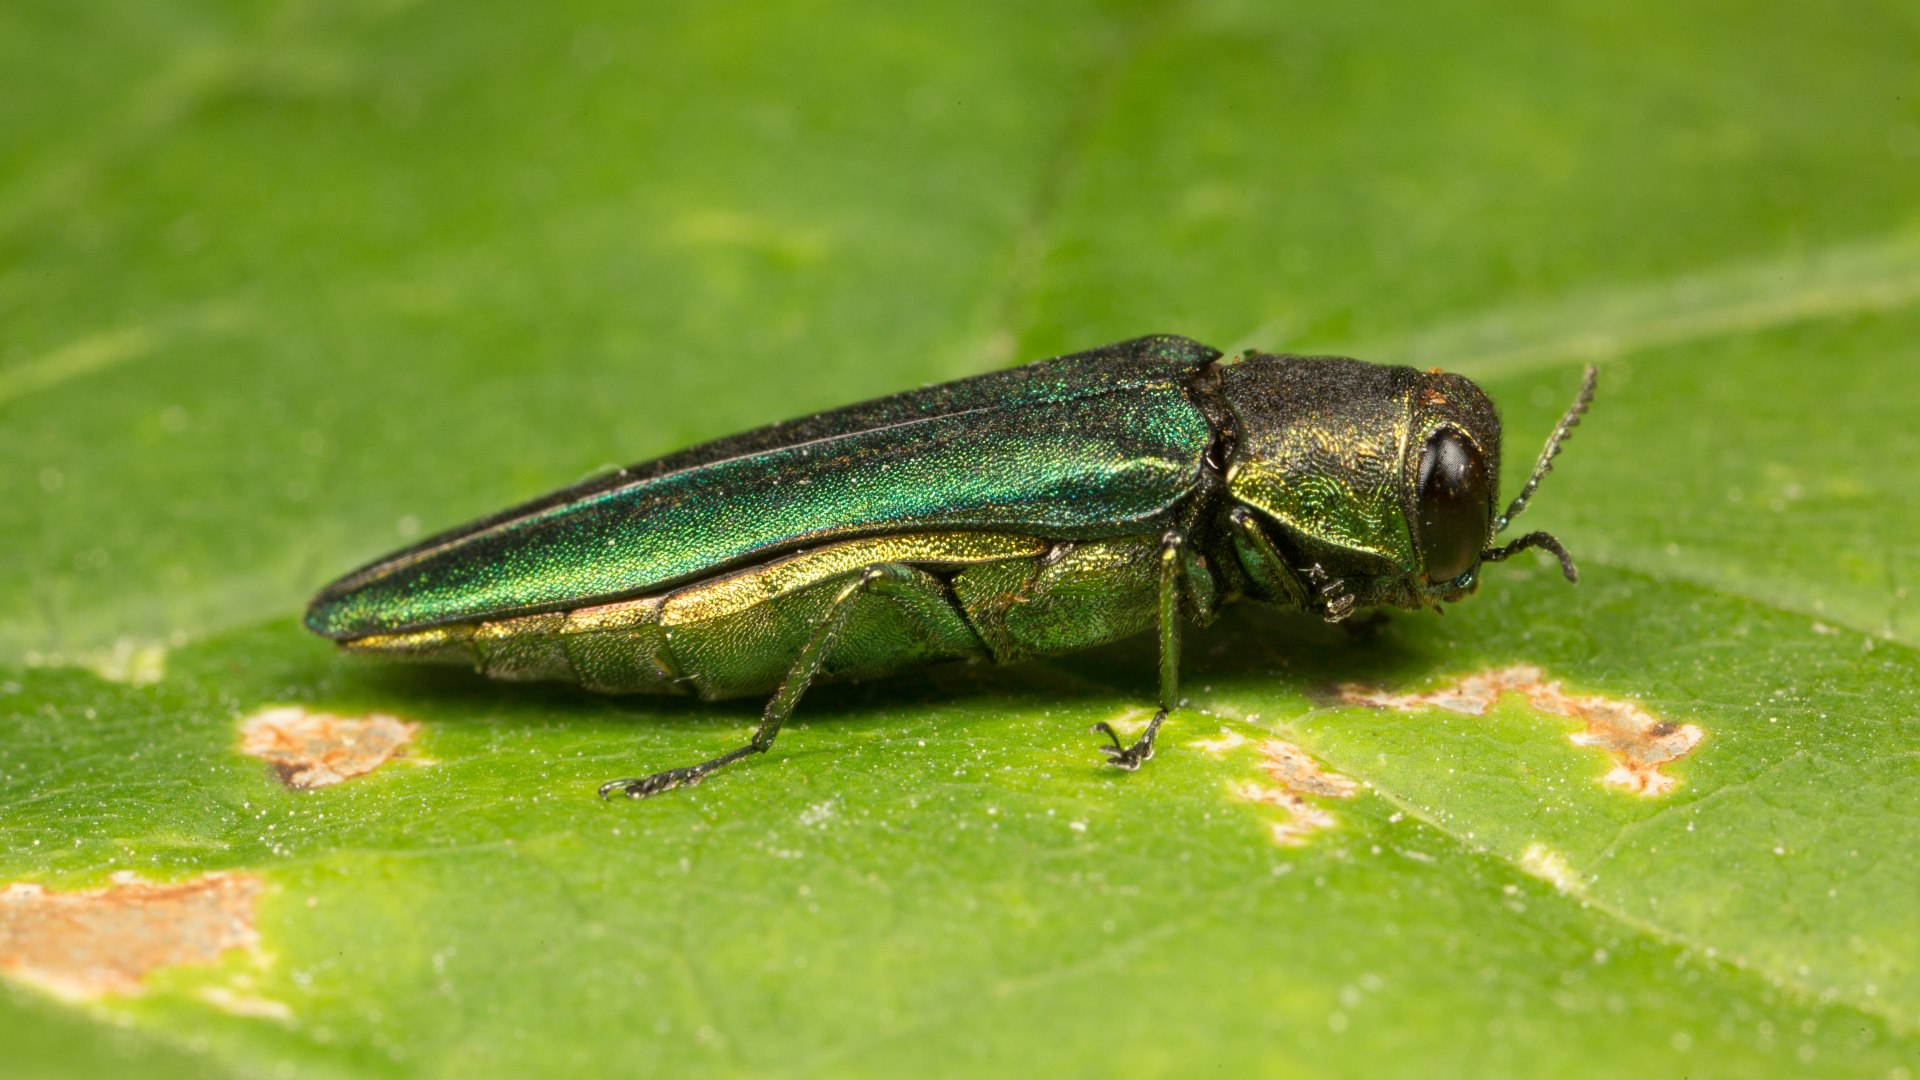 Emerald ash borer insect found in client's property in Urbandale, IA.